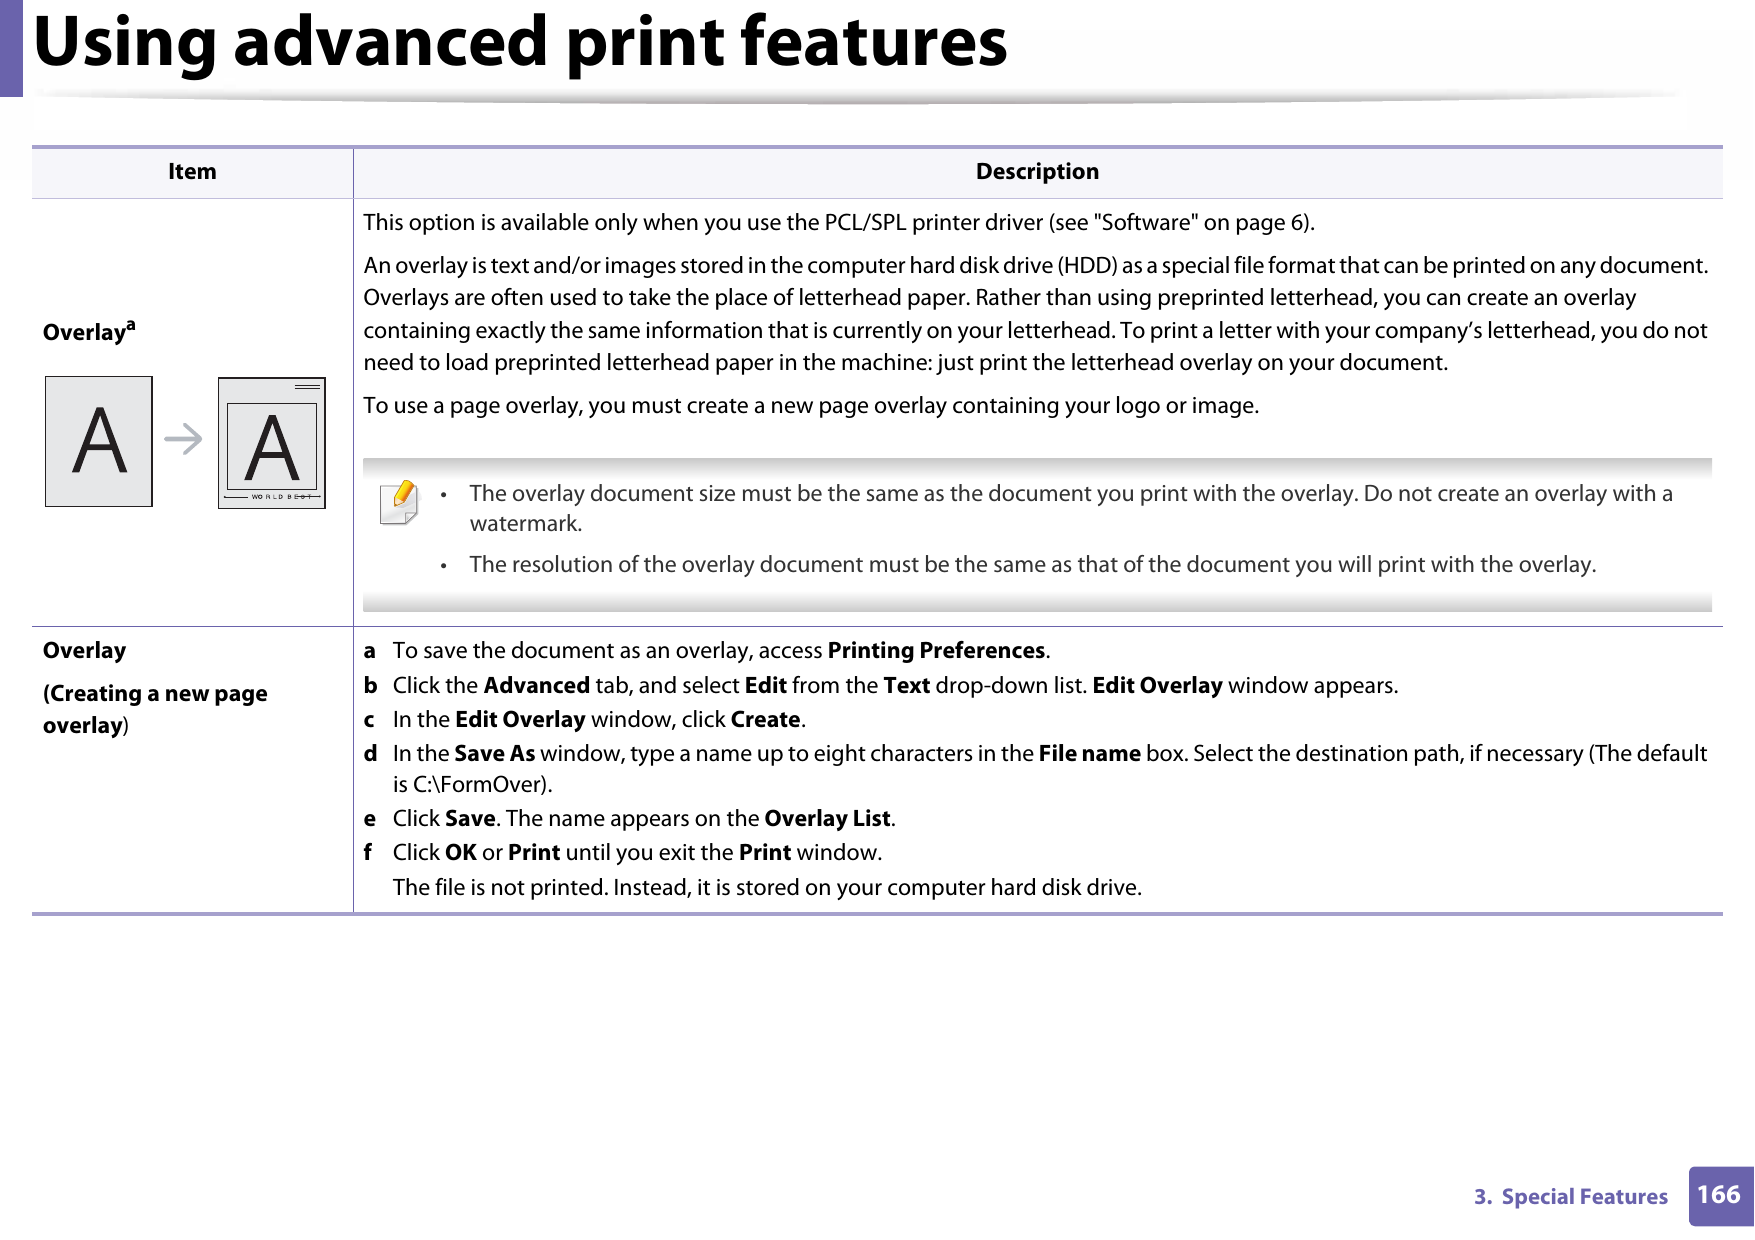 Using advanced print features1663.  Special FeaturesOverlayaThis option is available only when you use the PCL/SPL printer driver (see &quot;Software&quot; on page 6).An overlay is text and/or images stored in the computer hard disk drive (HDD) as a special file format that can be printed on any document. Overlays are often used to take the place of letterhead paper. Rather than using preprinted letterhead, you can create an overlay containing exactly the same information that is currently on your letterhead. To print a letter with your company’s letterhead, you do not need to load preprinted letterhead paper in the machine: just print the letterhead overlay on your document.To use a page overlay, you must create a new page overlay containing your logo or image. • The overlay document size must be the same as the document you print with the overlay. Do not create an overlay with a watermark.• The resolution of the overlay document must be the same as that of the document you will print with the overlay. Overlay(Creating a new page overlay)a  To save the document as an overlay, access Printing Preferences.b  Click the Advanced tab, and select Edit from the Text drop-down list. Edit Overlay window appears.c  In the Edit Overlay window, click Create. d  In the Save As window, type a name up to eight characters in the File name box. Select the destination path, if necessary (The default is C:\FormOver).e  Click Save. The name appears on the Overlay List. f  Click OK or Print until you exit the Print window.The file is not printed. Instead, it is stored on your computer hard disk drive.Item Description